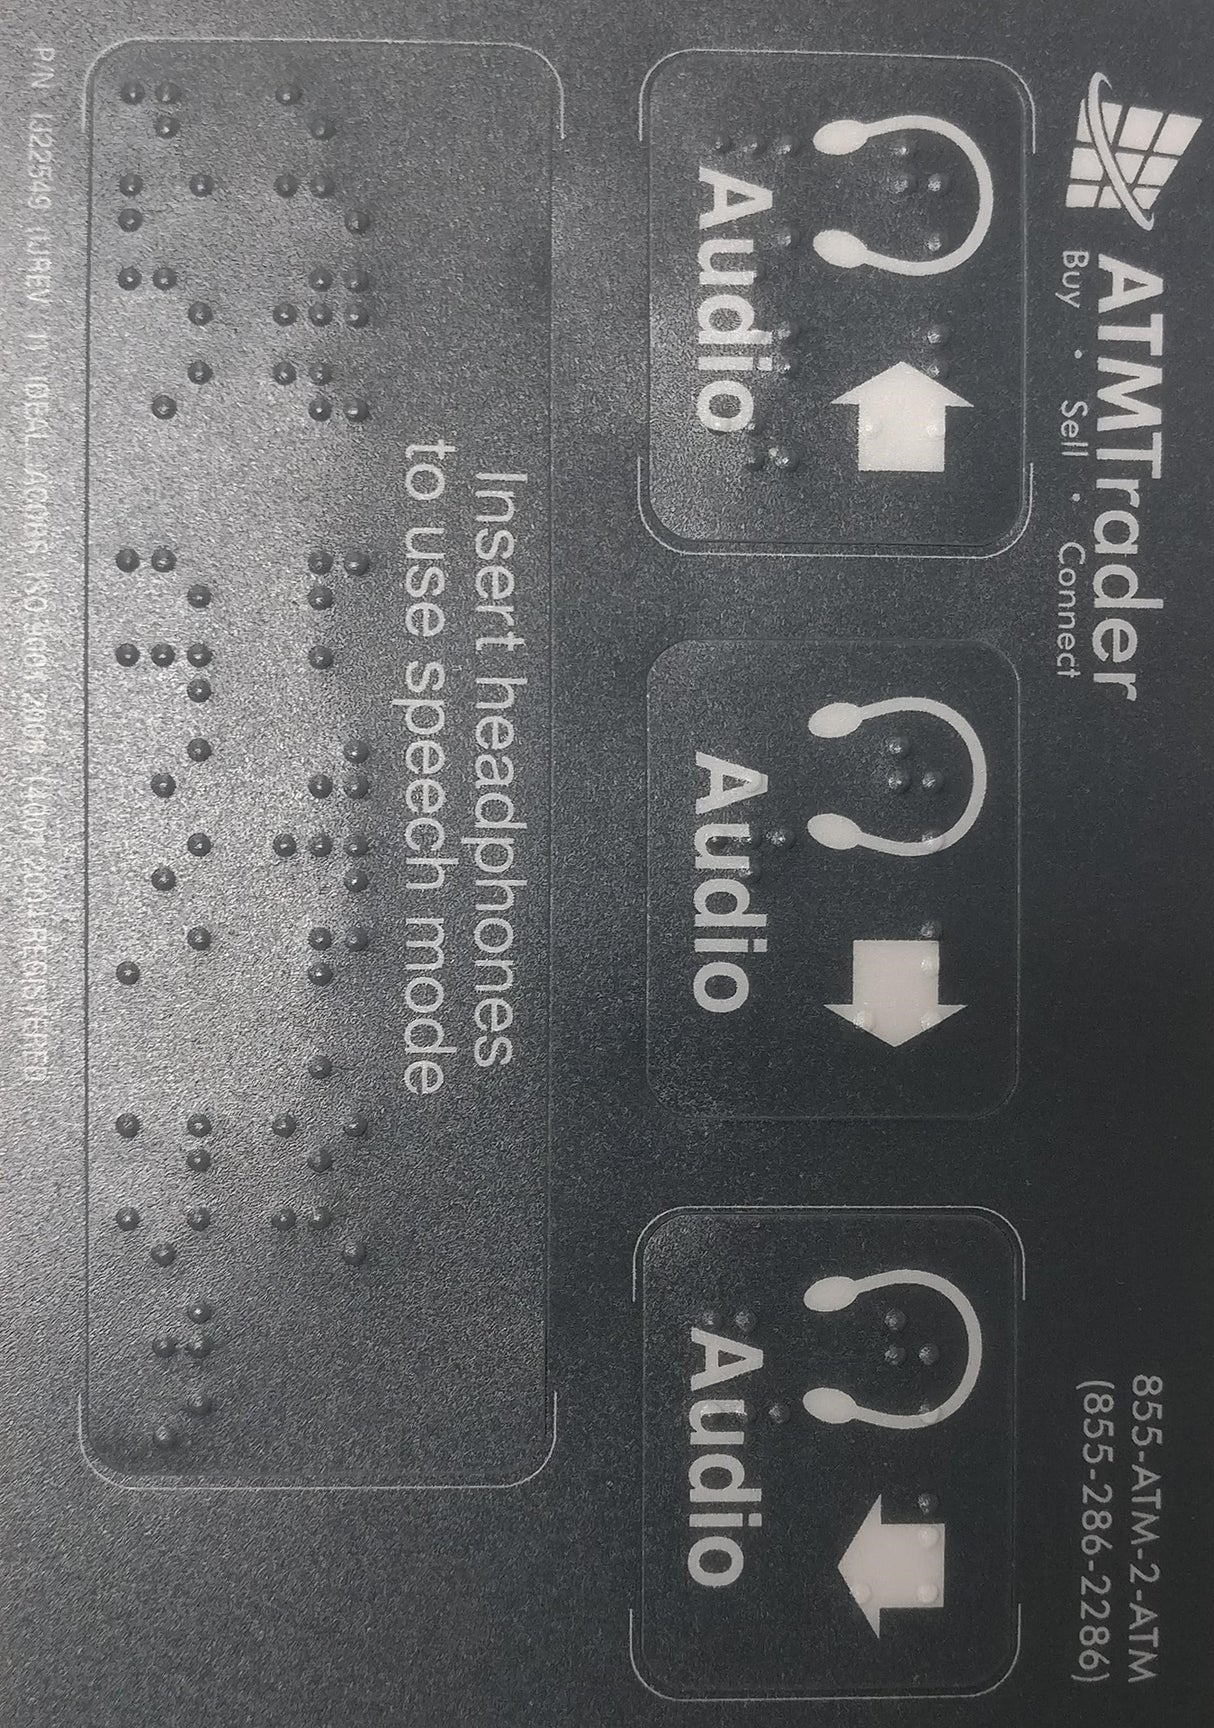 ATM Decal - ADA Compliant Braille